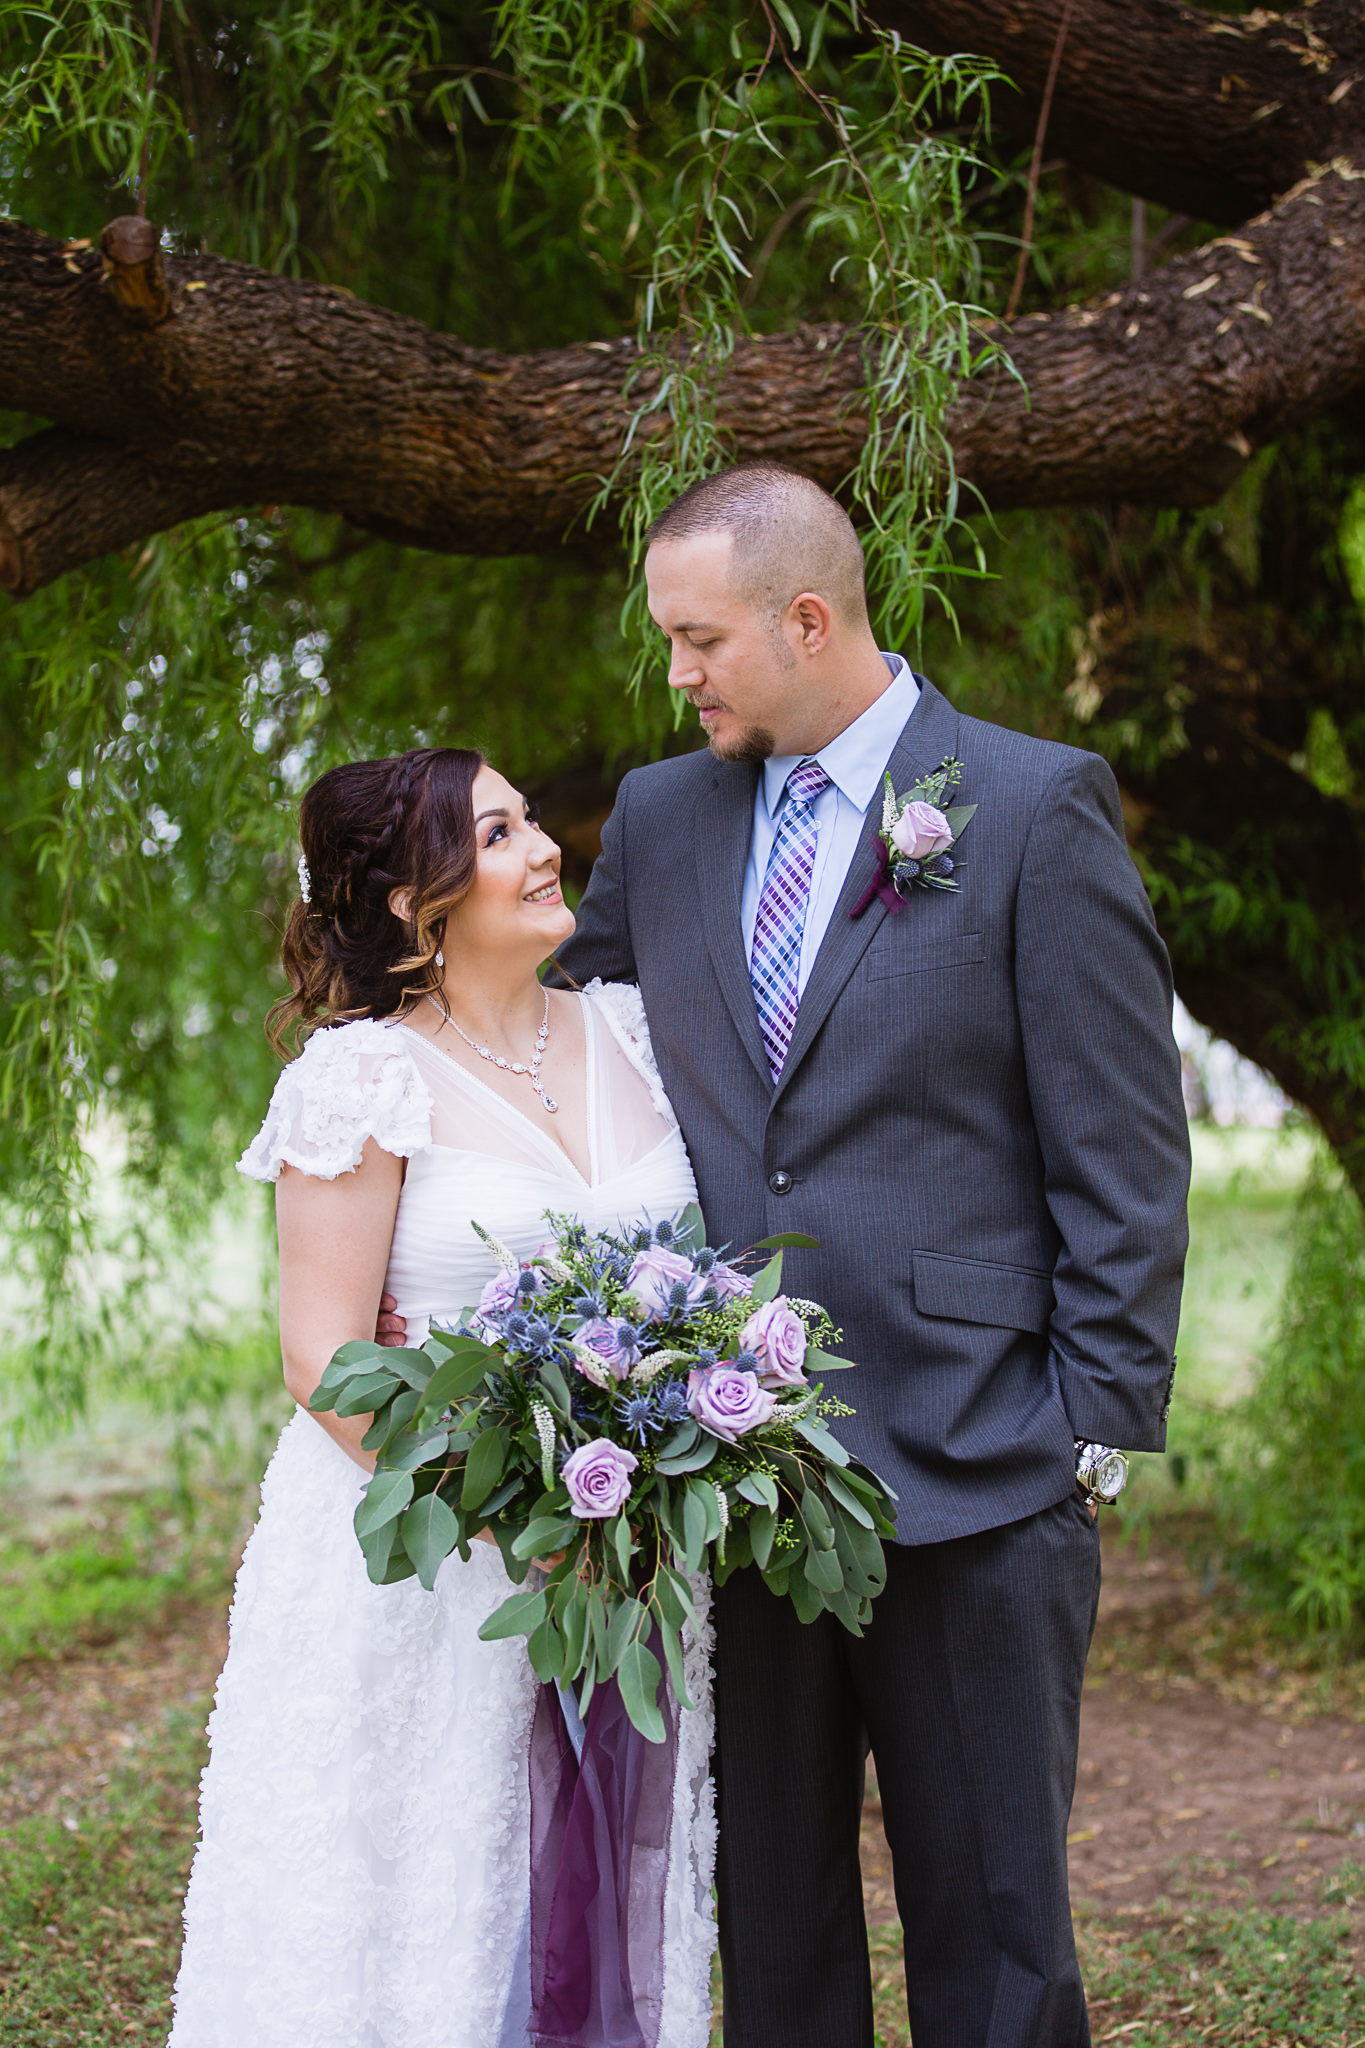 Bride and groom looking at each other in front of tree by wedding photography vendor PMA Photography.